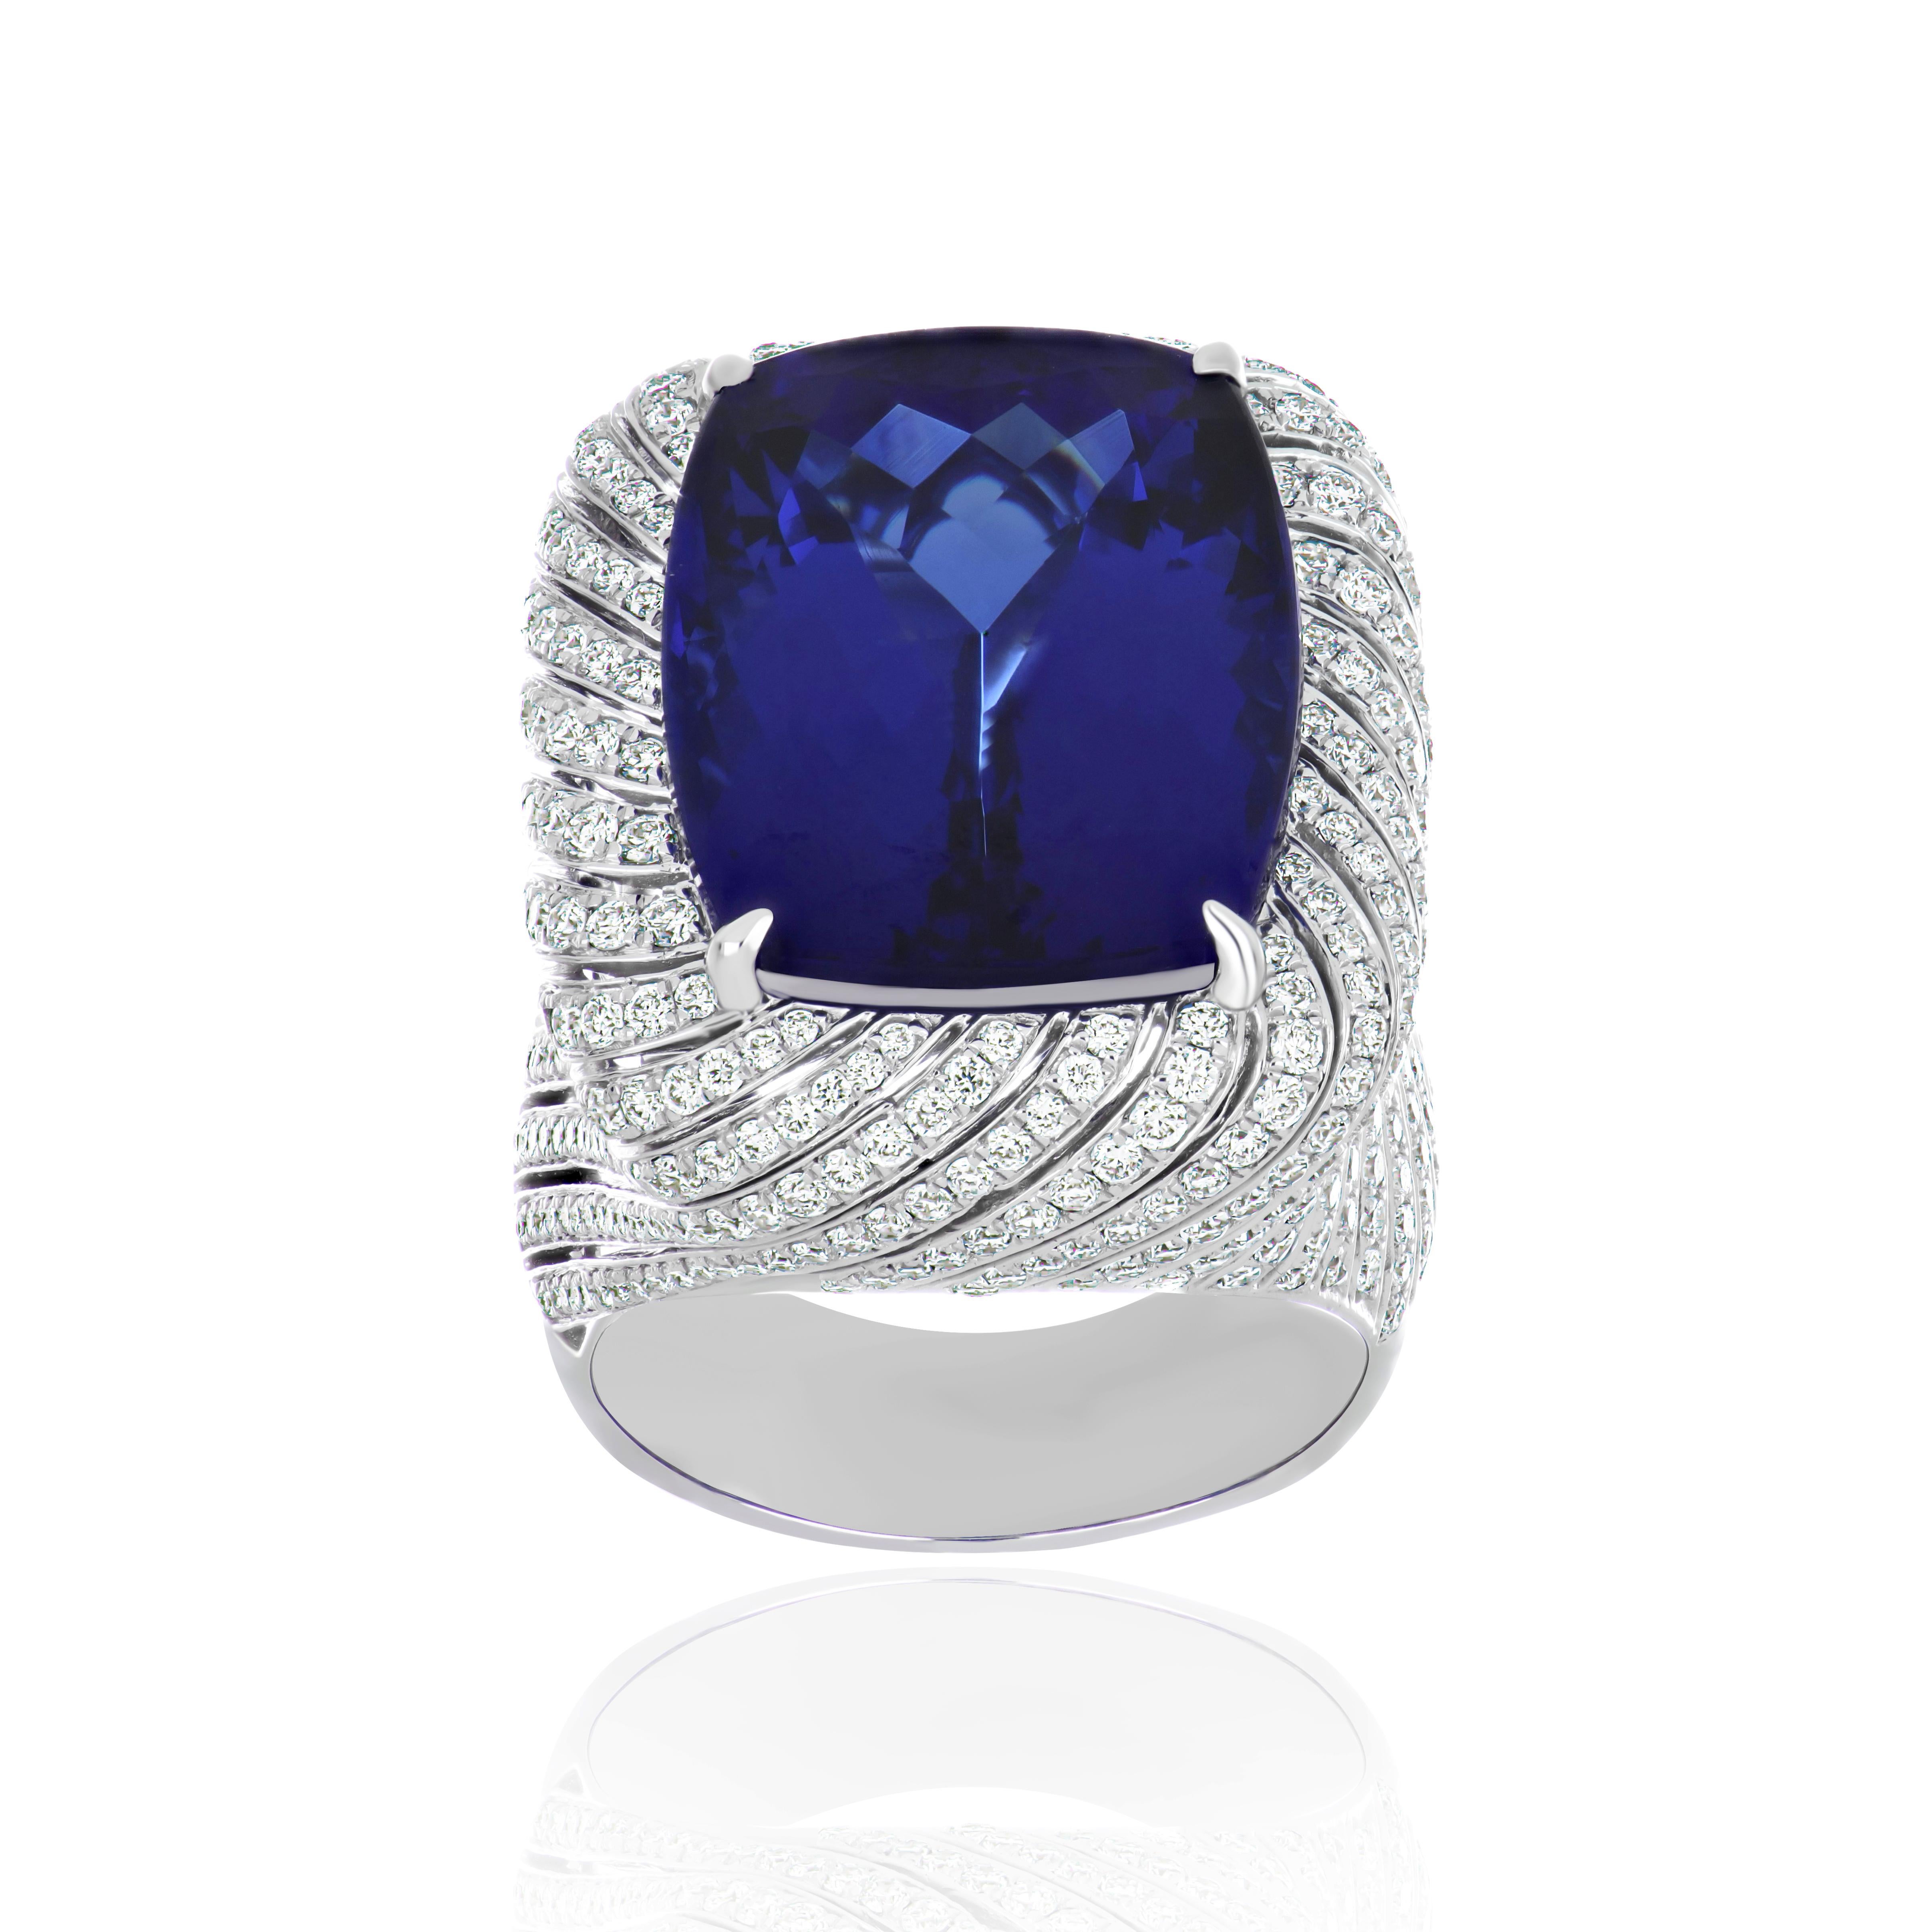 Elegant and Exquisitely detailed White Gold Ring, with a rare 23.8 Cts (approx.) Cushion Shape Cut Tanzanite set in the center beautifully accented with Micro pave set Diamonds, weighing approx. 2.8 CT's (approx). total carat weight to further